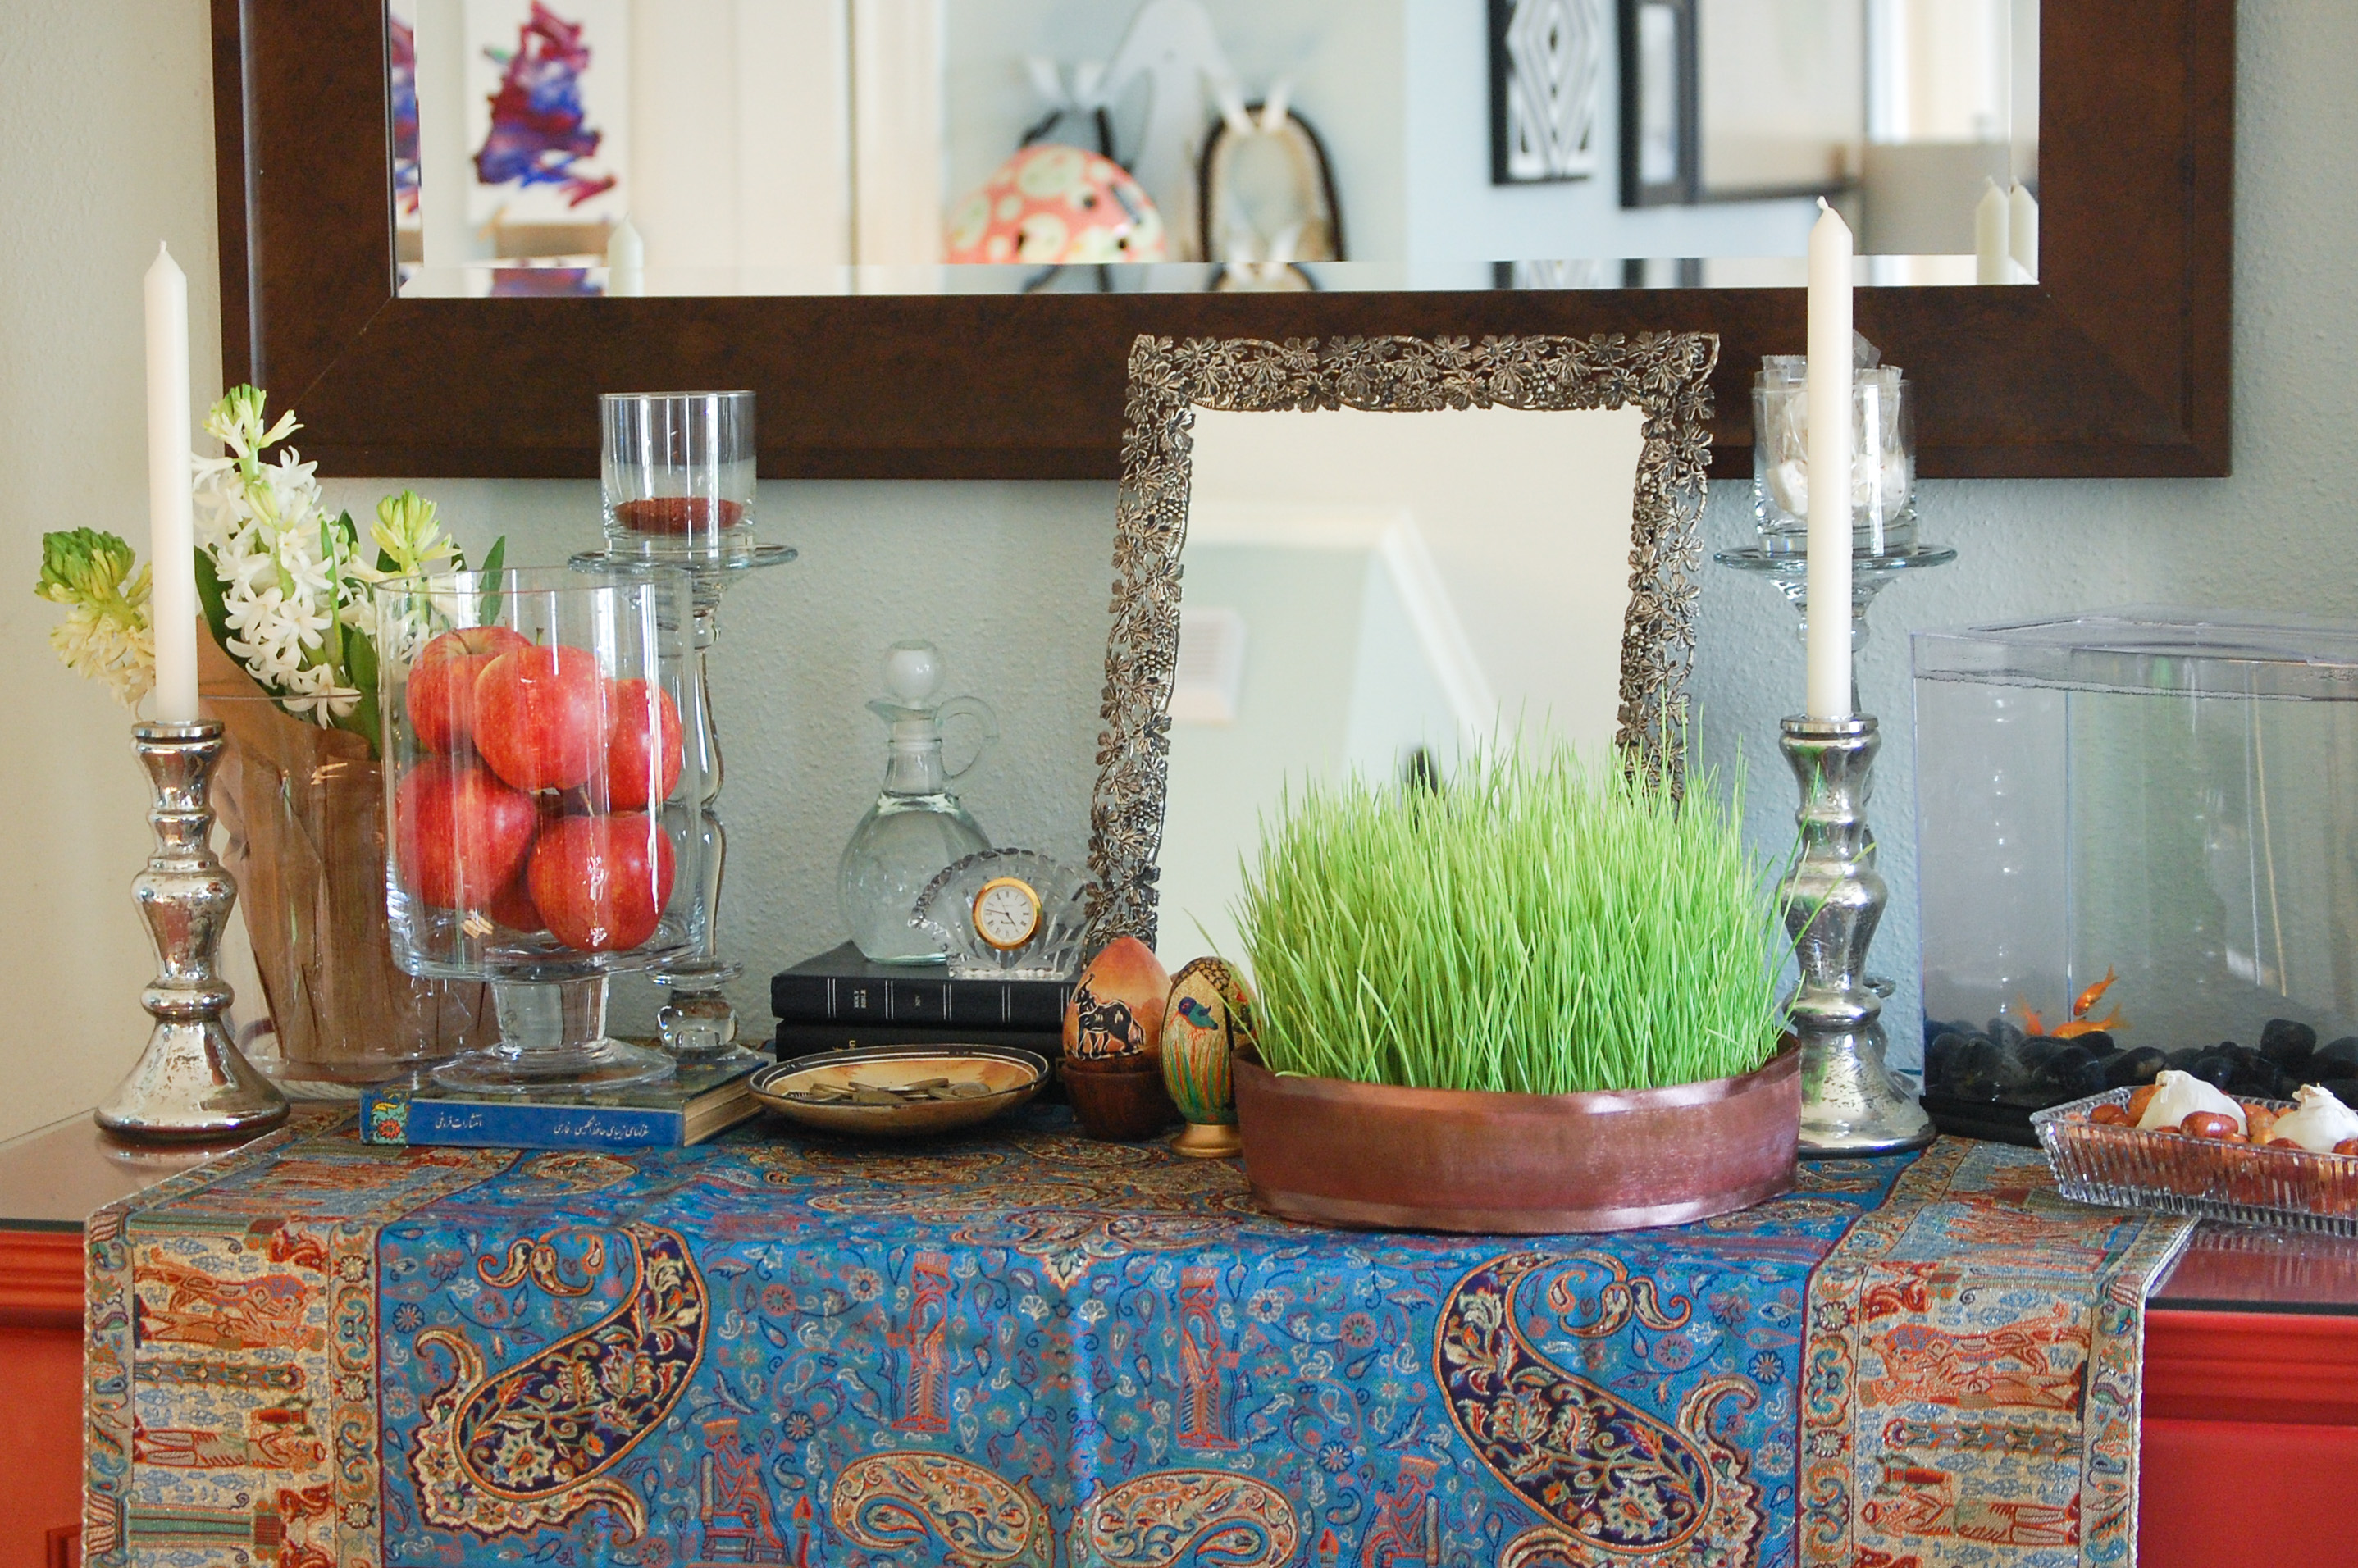 Celebrating The Persian New Year: Saba’s Favorite Nowruz Traditions